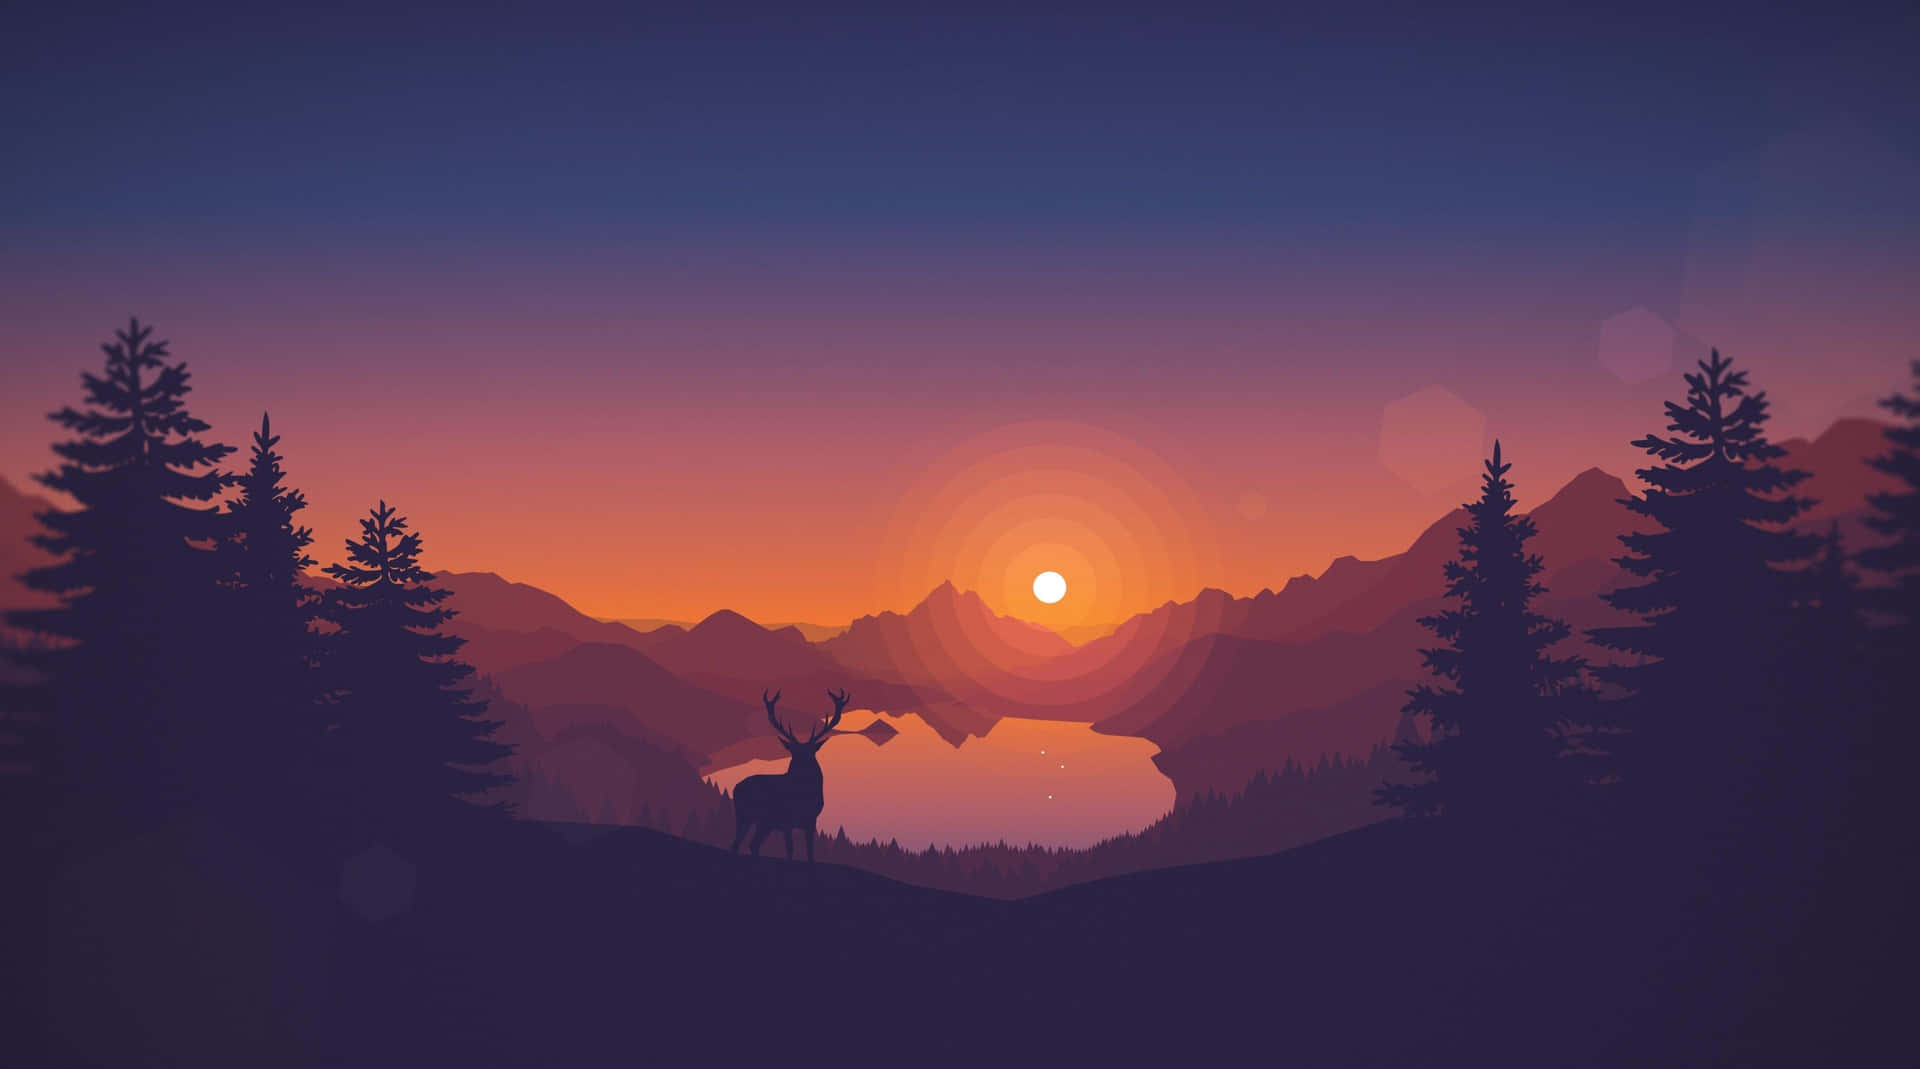 Enjoy a beautiful sunset in the serene forests of Wyoming with Firewatch.